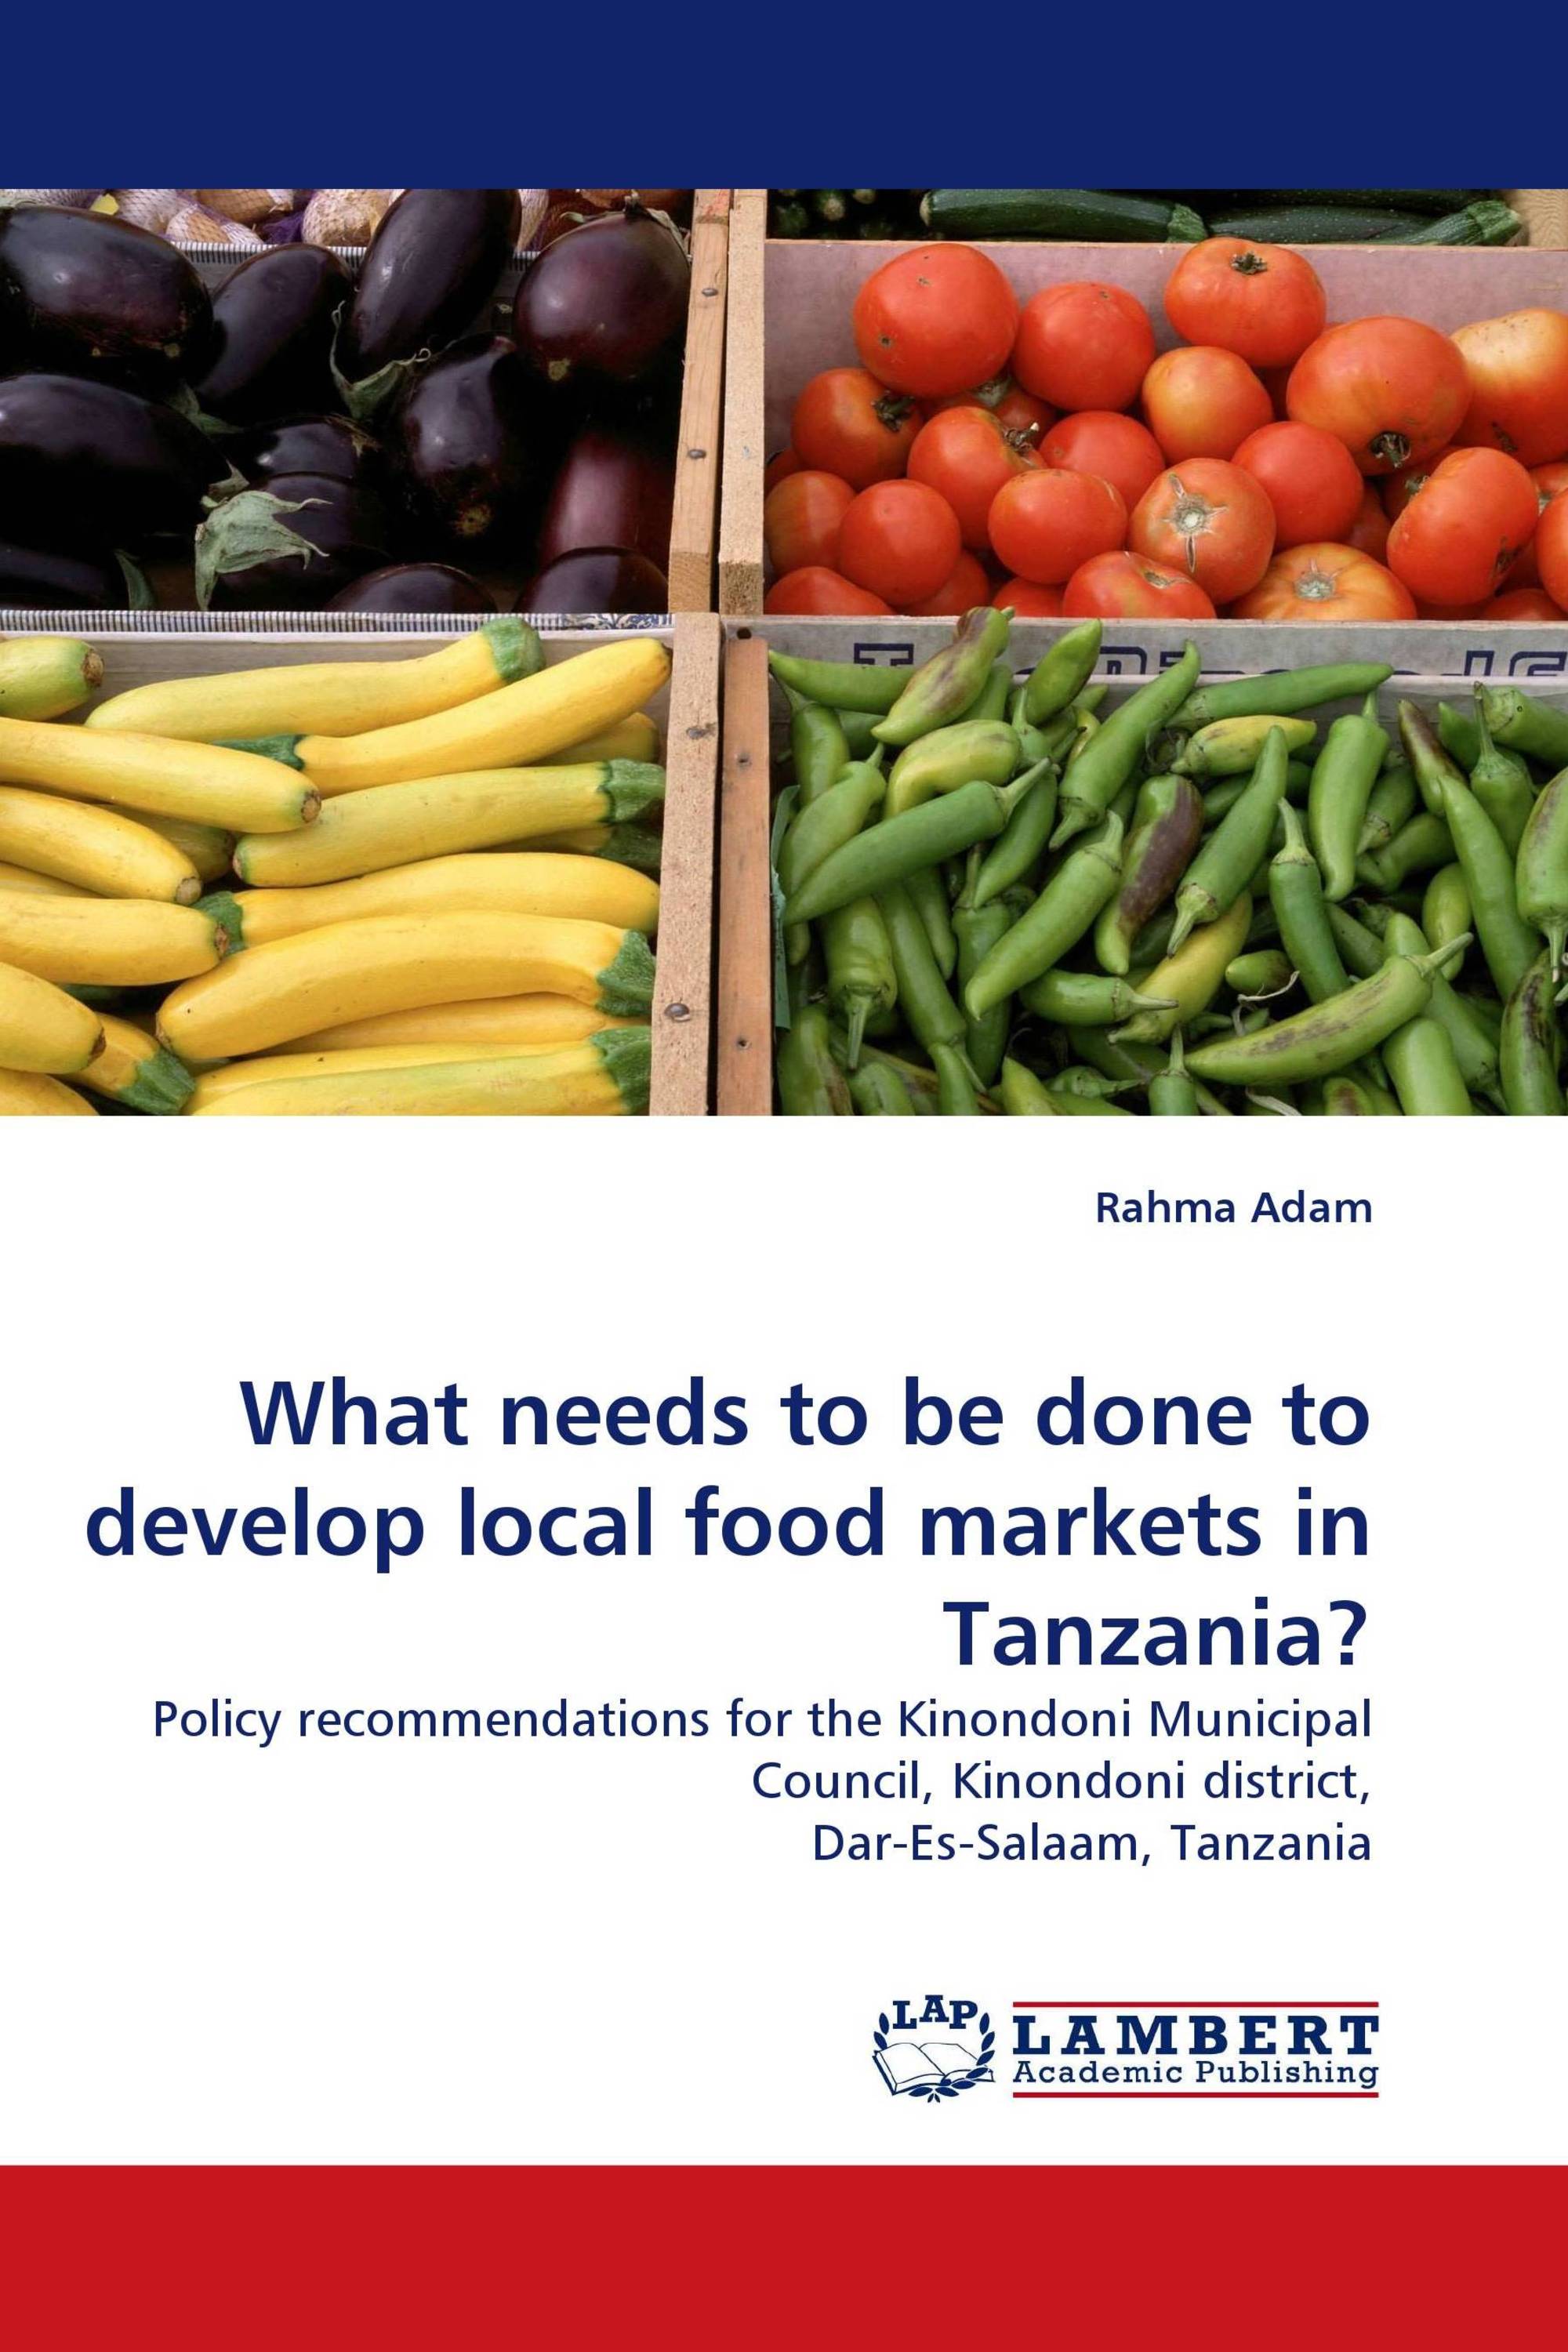 What needs to be done to develop local food markets in Tanzania?